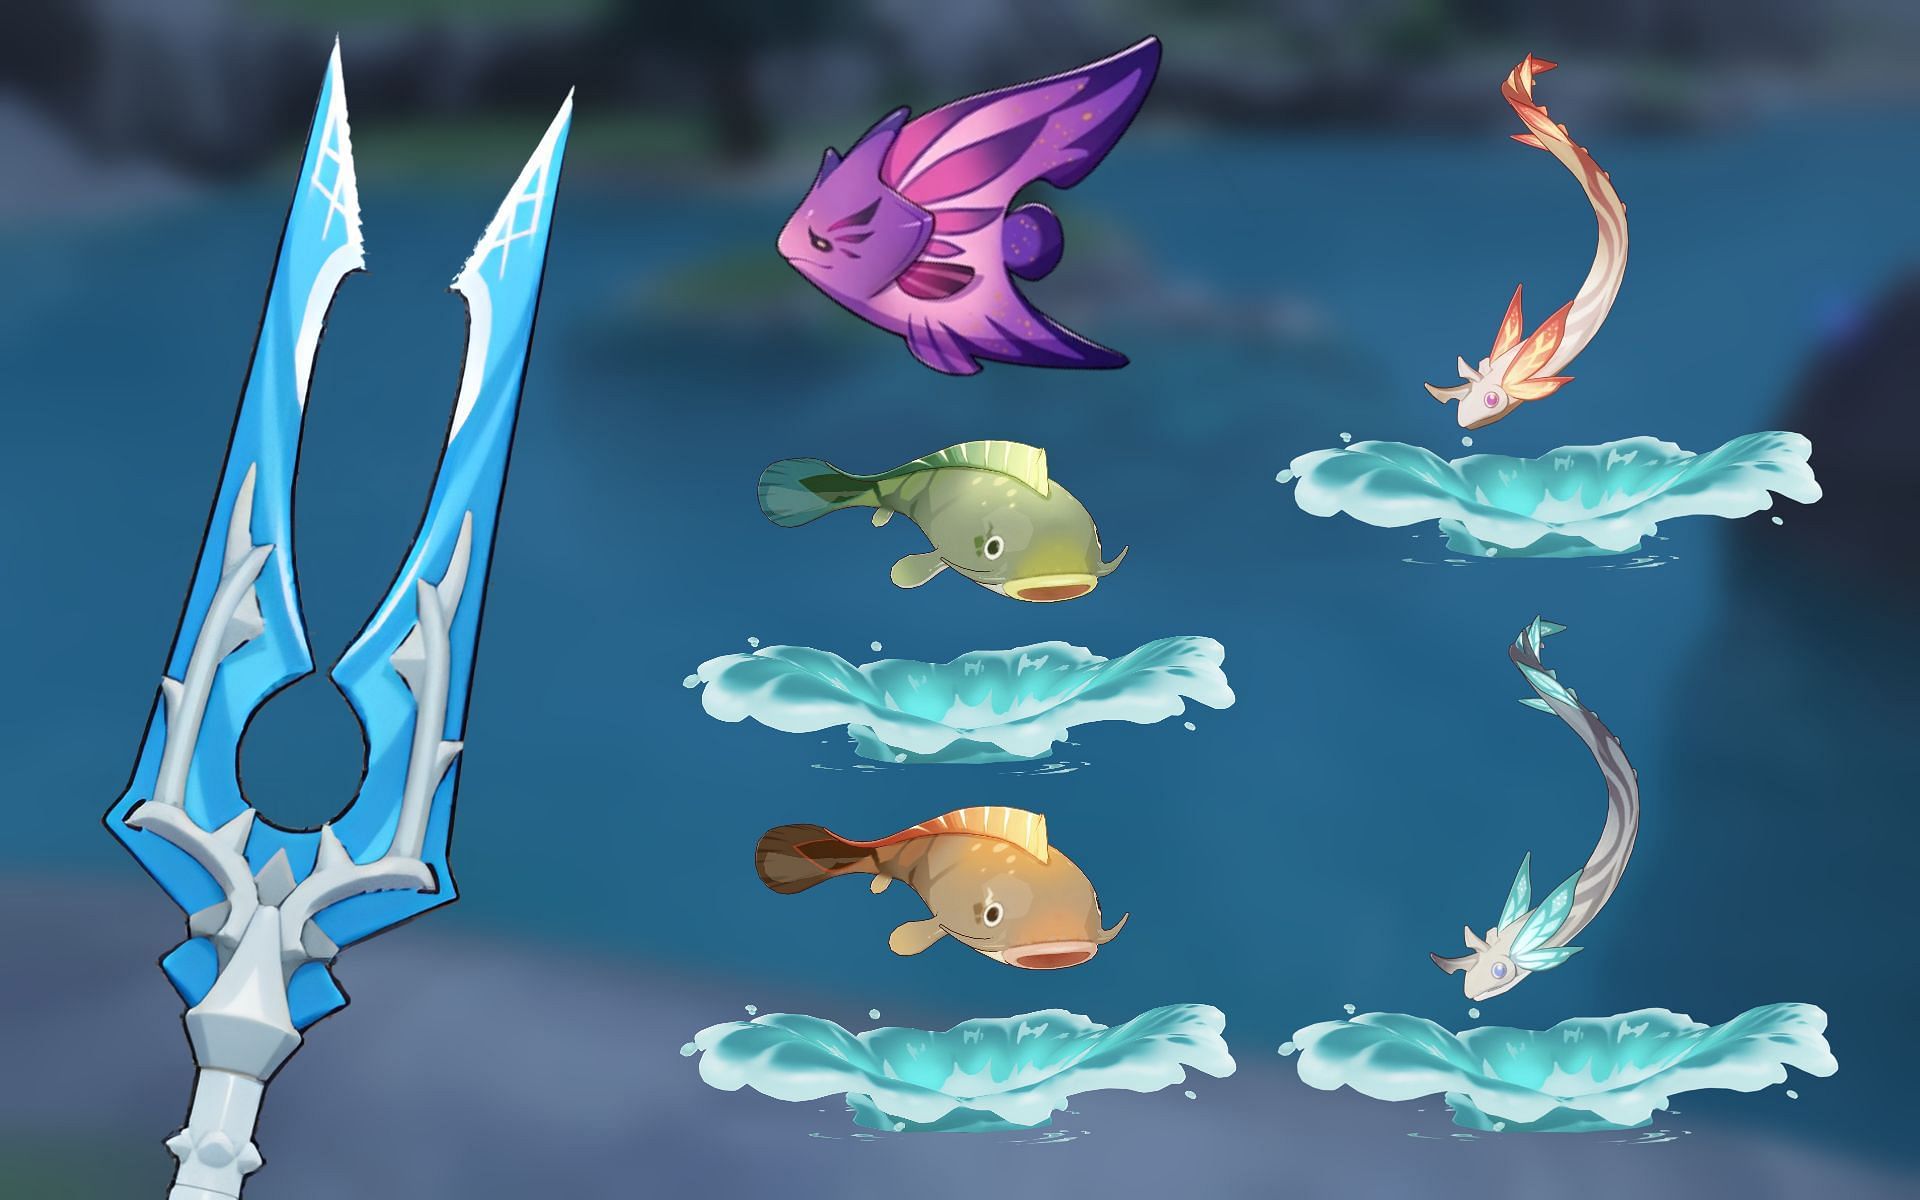 The Catch requires Genshin Impact players to go to several fishing spot locations (Image via miHoYo)